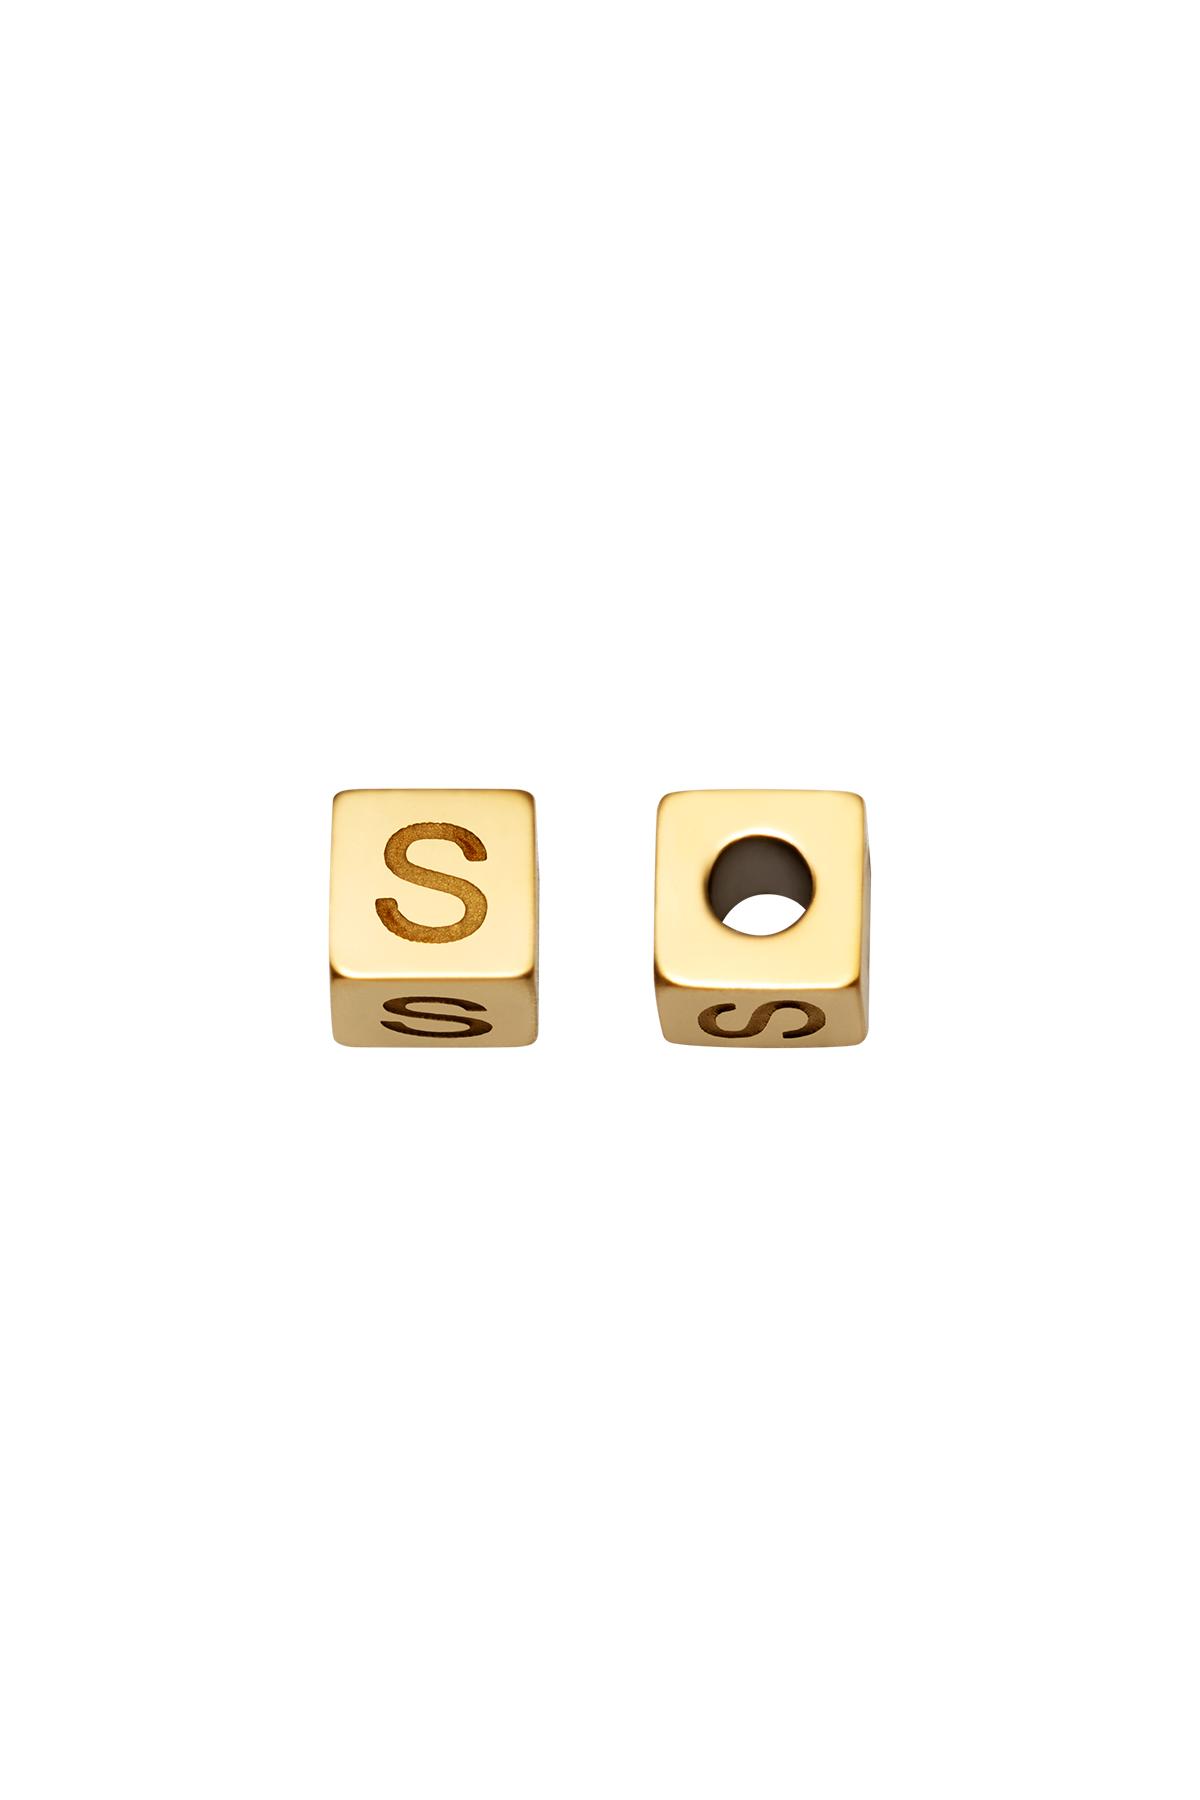 Gold / DIY Beads Alphabet Gold S Stainless Steel Picture10